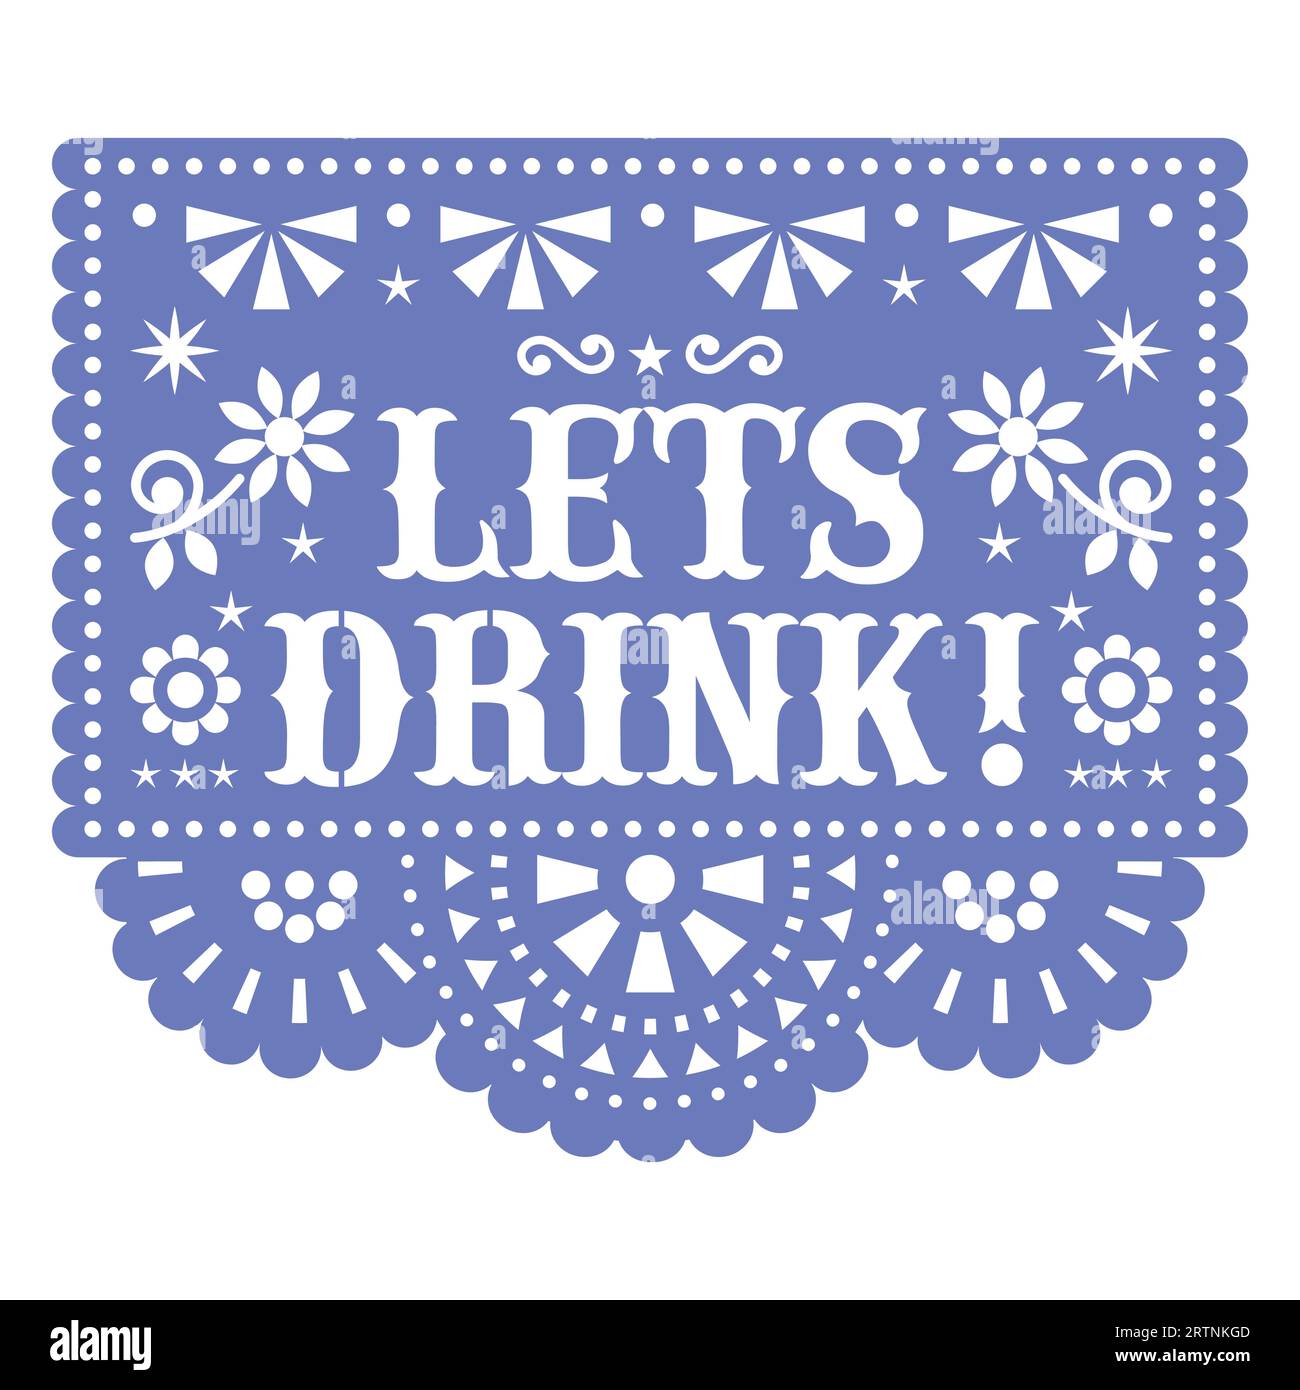 Lets Drink Papel Picado Vector Design Mexican Cutout Paper Fiesta Decoration In Blue On White 8313